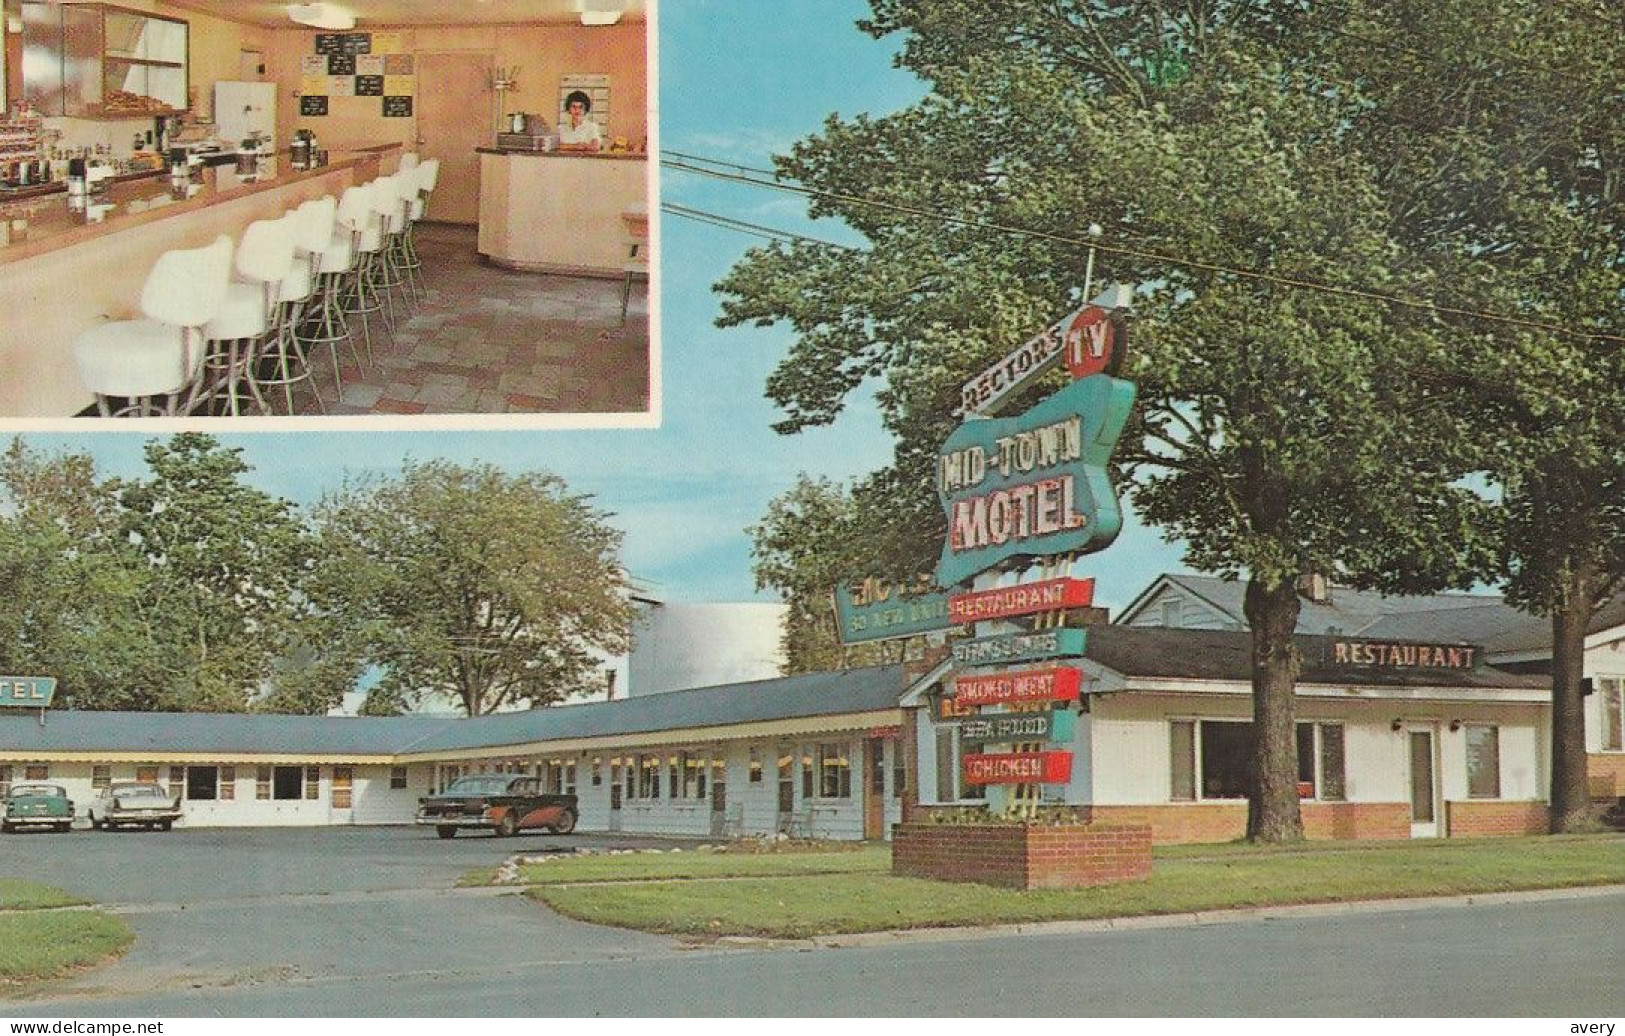 Midtown Motel, 112 Sailly Ave., Plattsburg, New York  North Of Business Section - Adirondack